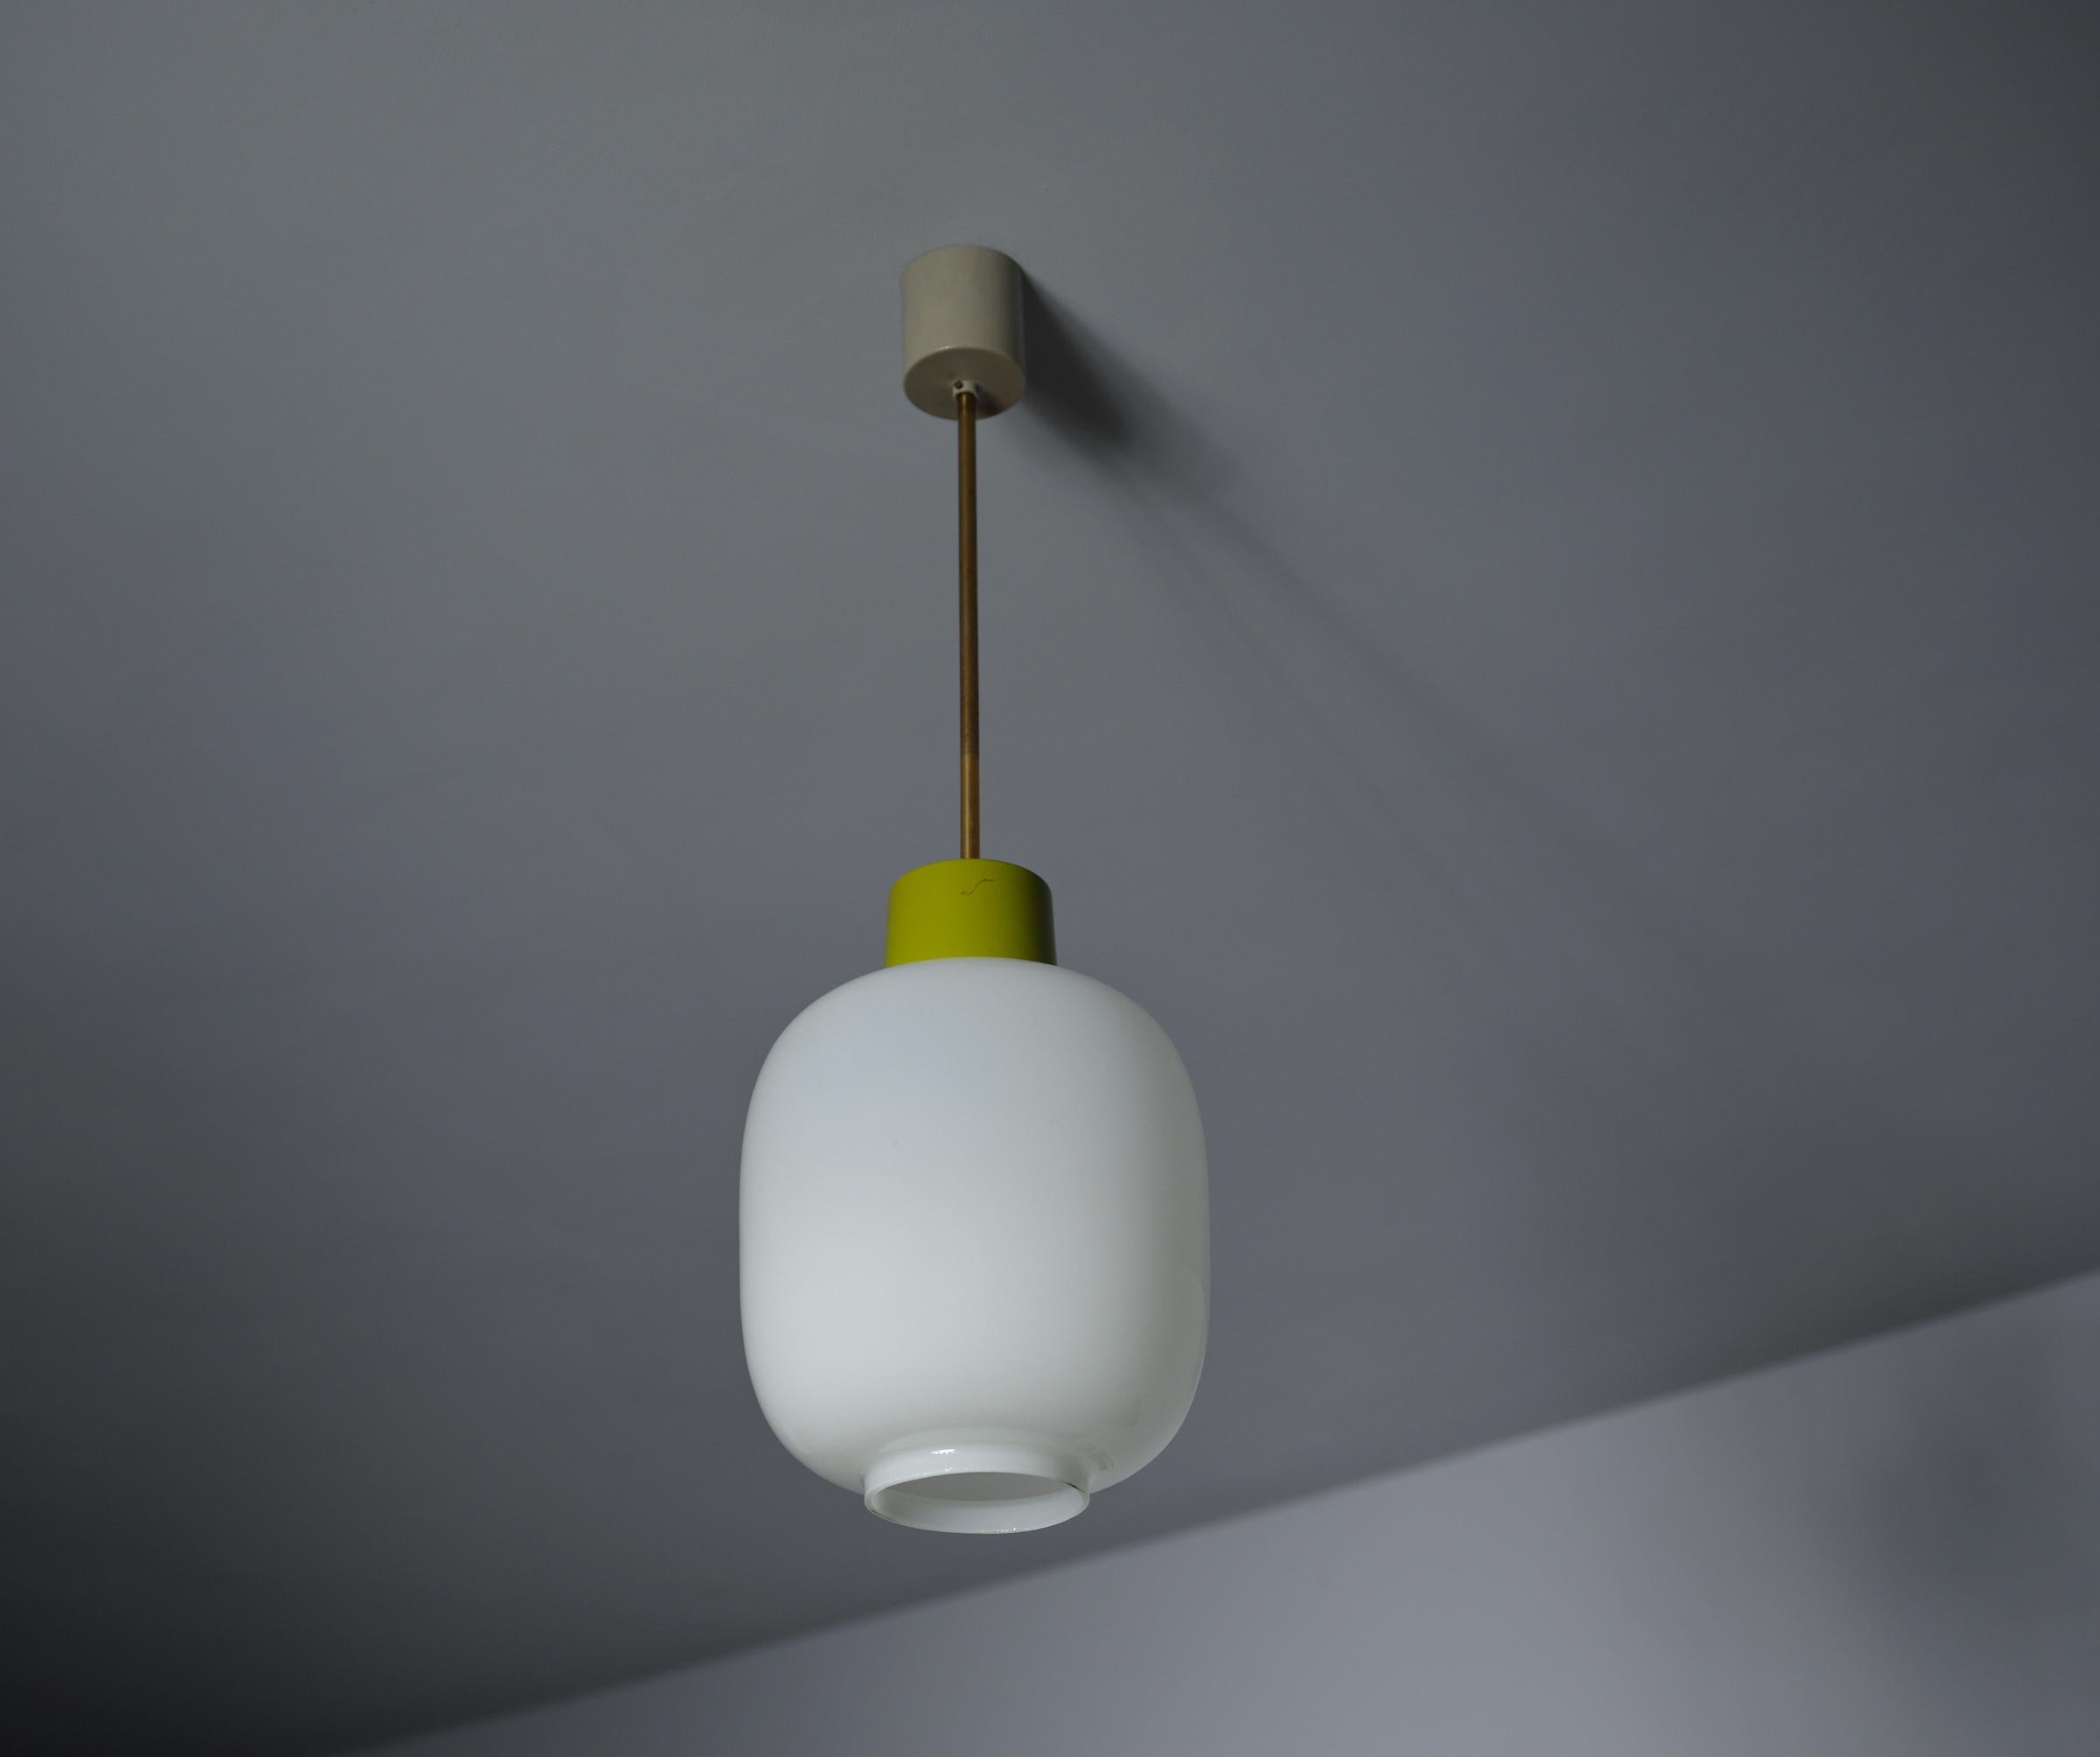 Italian Design : 1960s Modern Ceiling Pendant Lampshade In Good Condition For Sale In Rome, IT